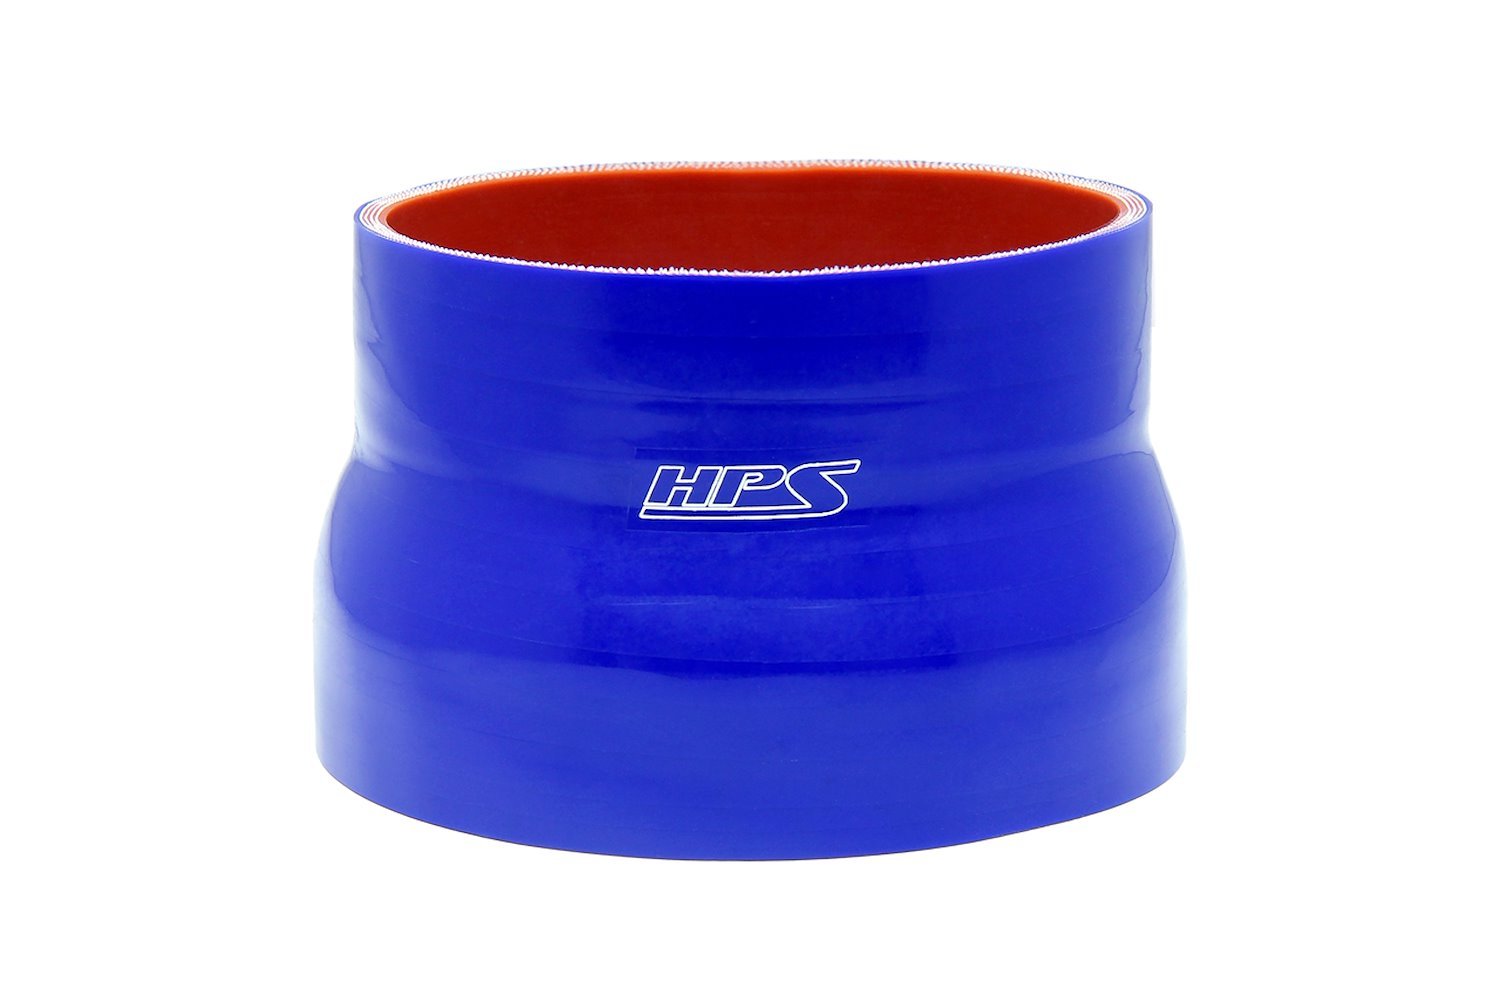 HTSR-400-450-L4-BLUE Silicone Reducer Hose, High-Temp 4-Ply Reinforced, 4 in. - 4-1/2 in. ID, 4 in. Long, Blue